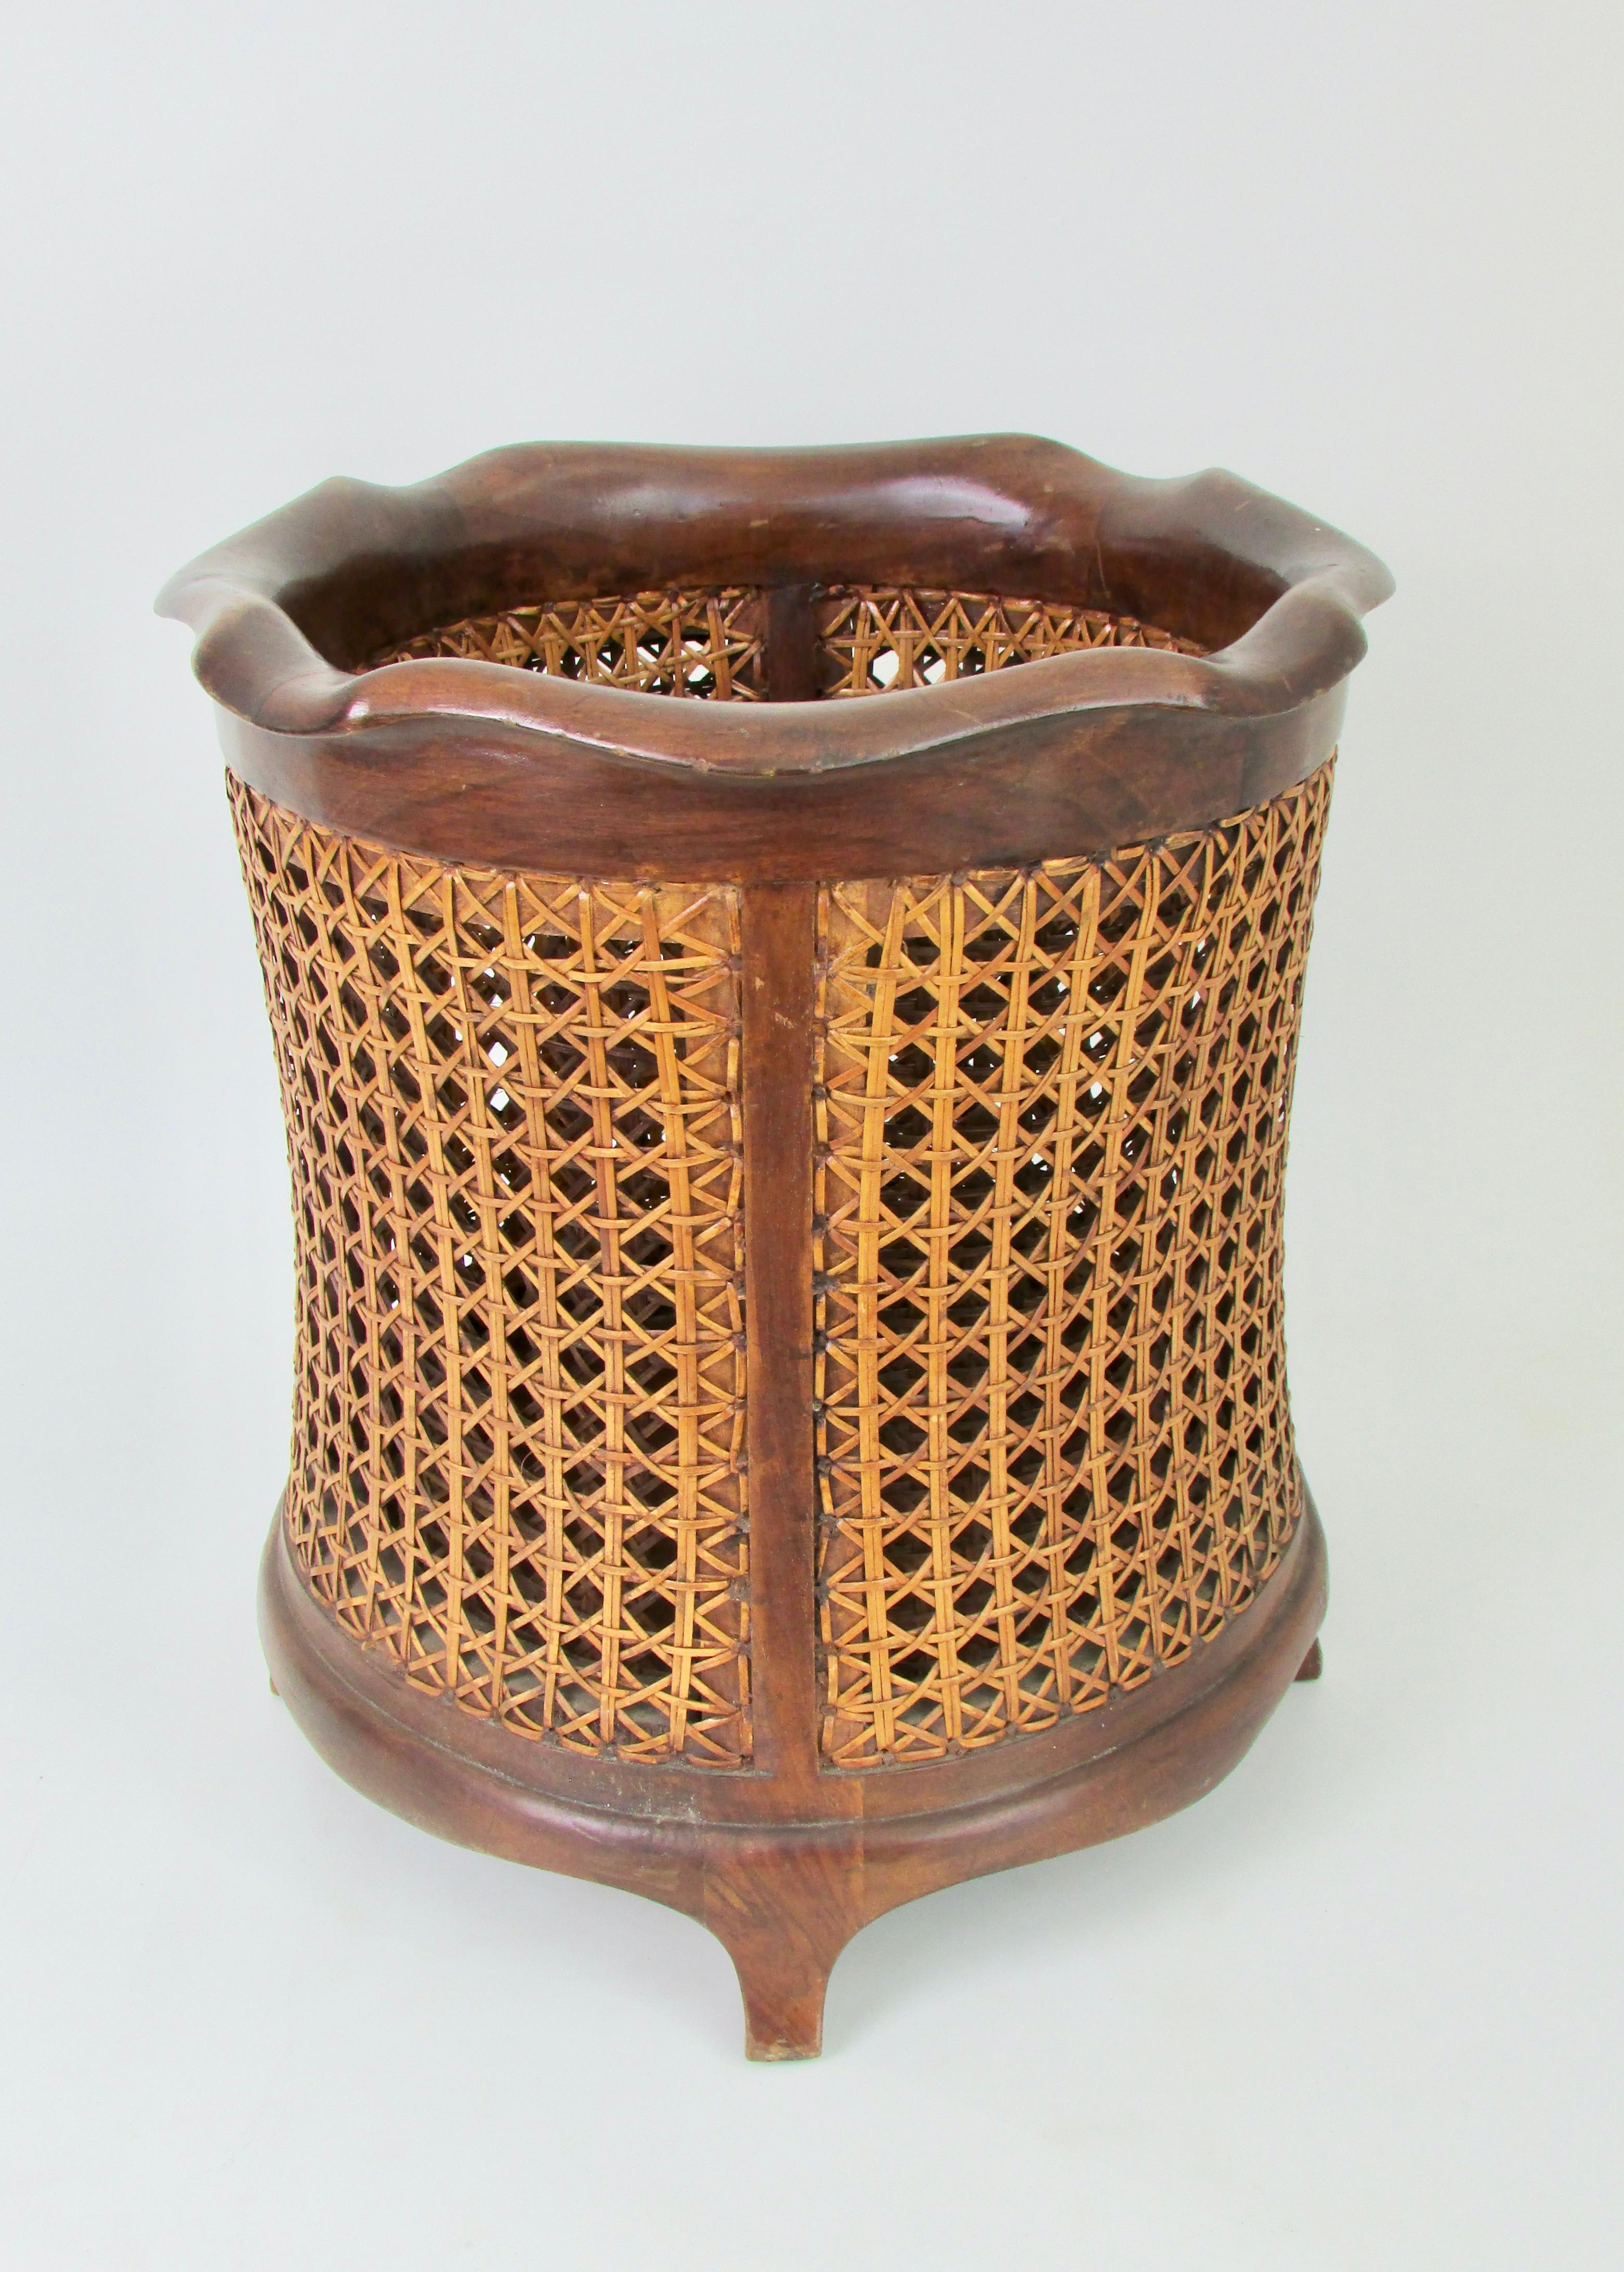 Rococo Revival Classic Italian solid walnut waste basket with hand caned side panels